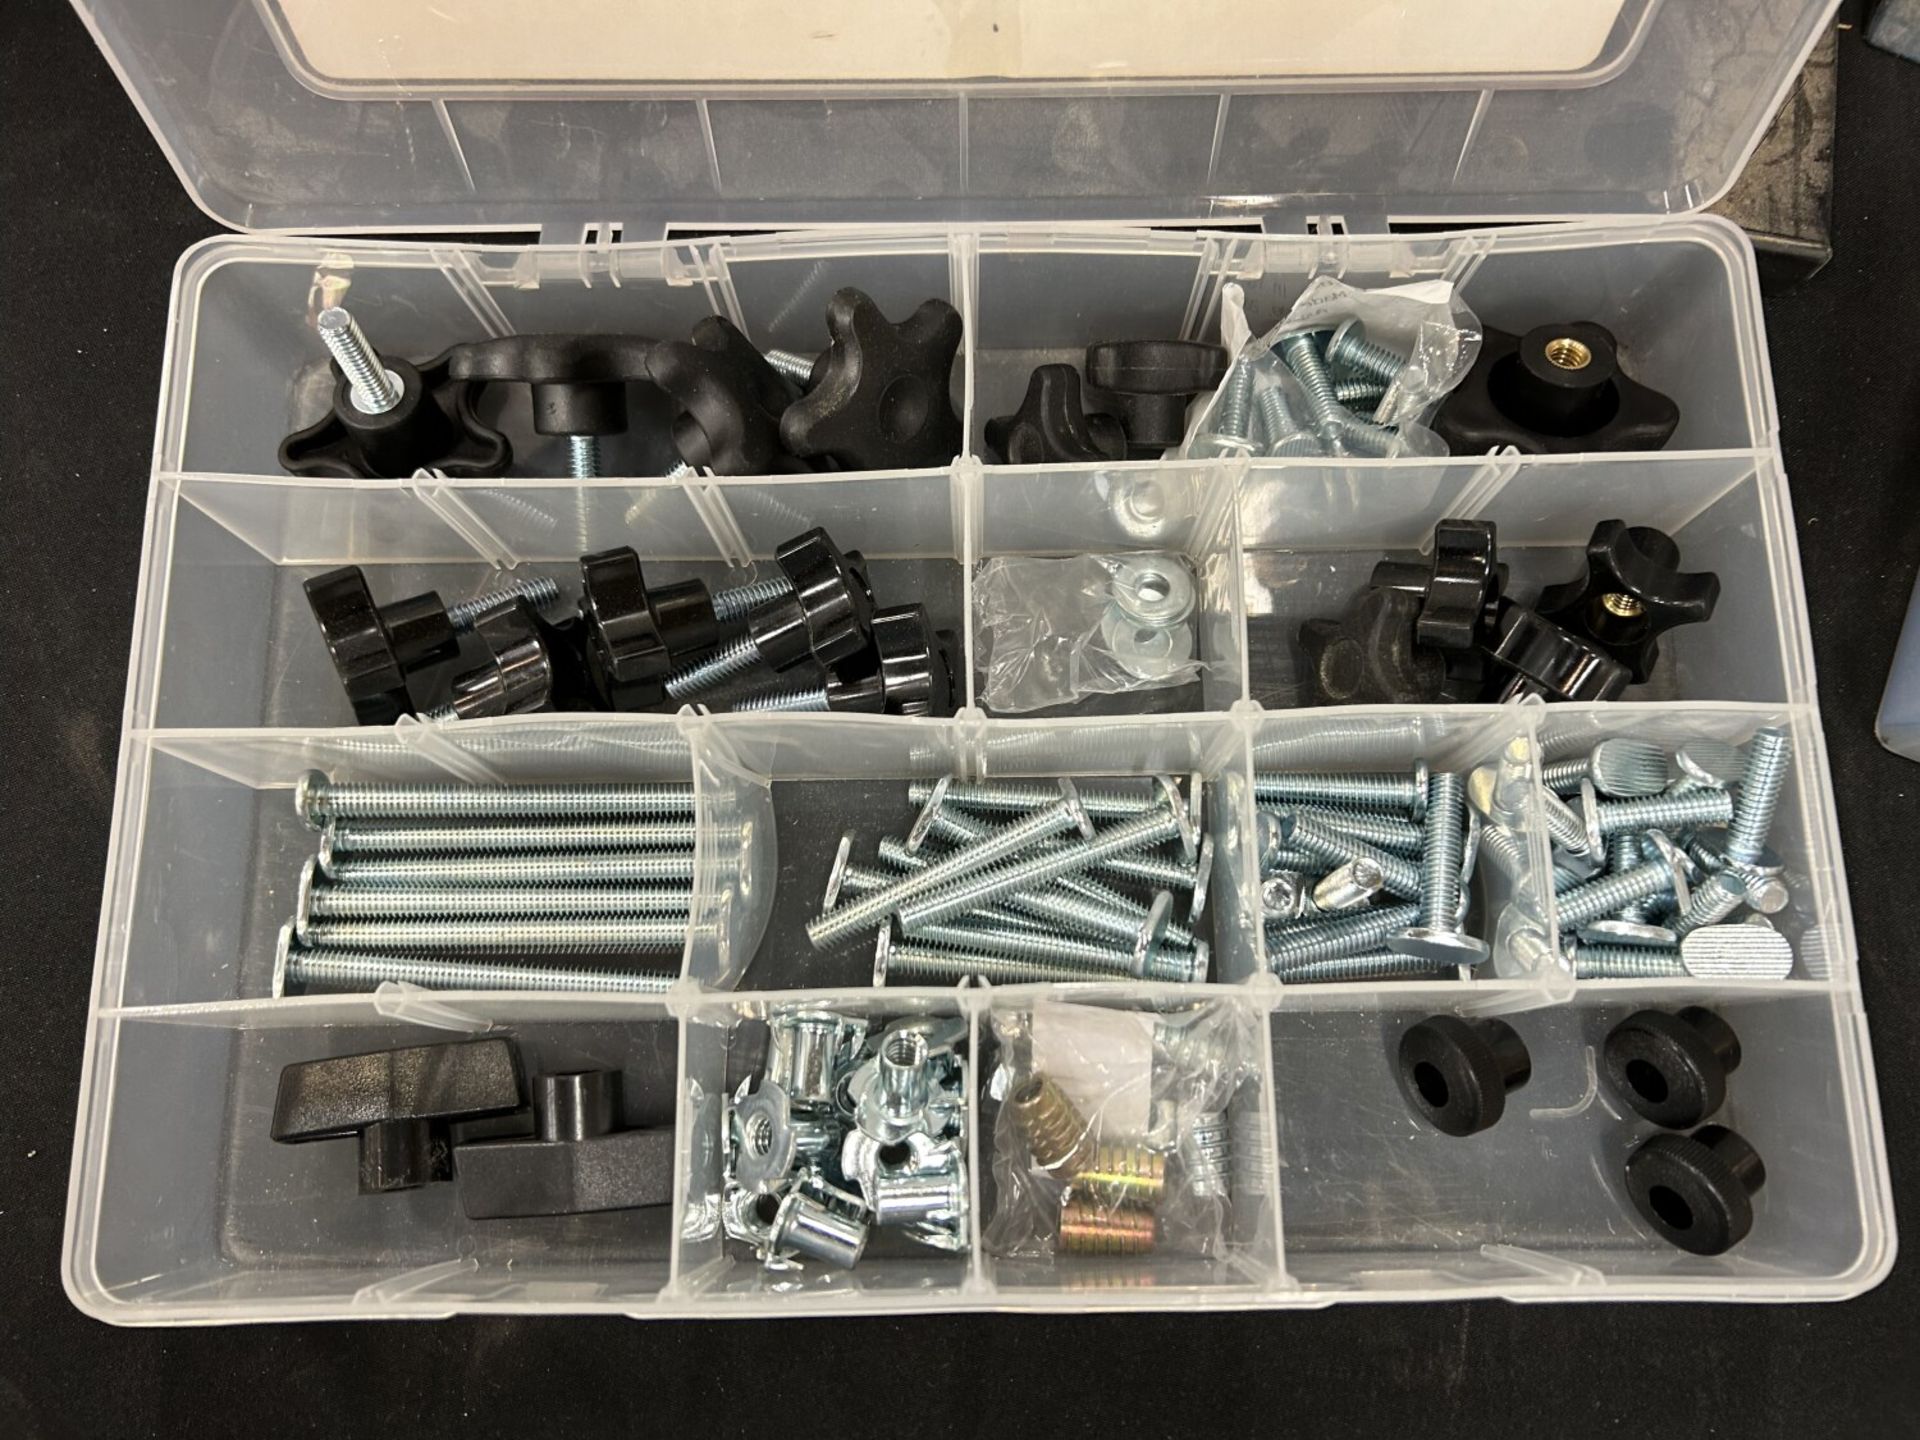 HARDWARE ASSORTMENT KIT, WIRE HEAT SHRINK WRAP, HARDWARE ASSORTMENT BINS AND CONTENTS - Image 3 of 4